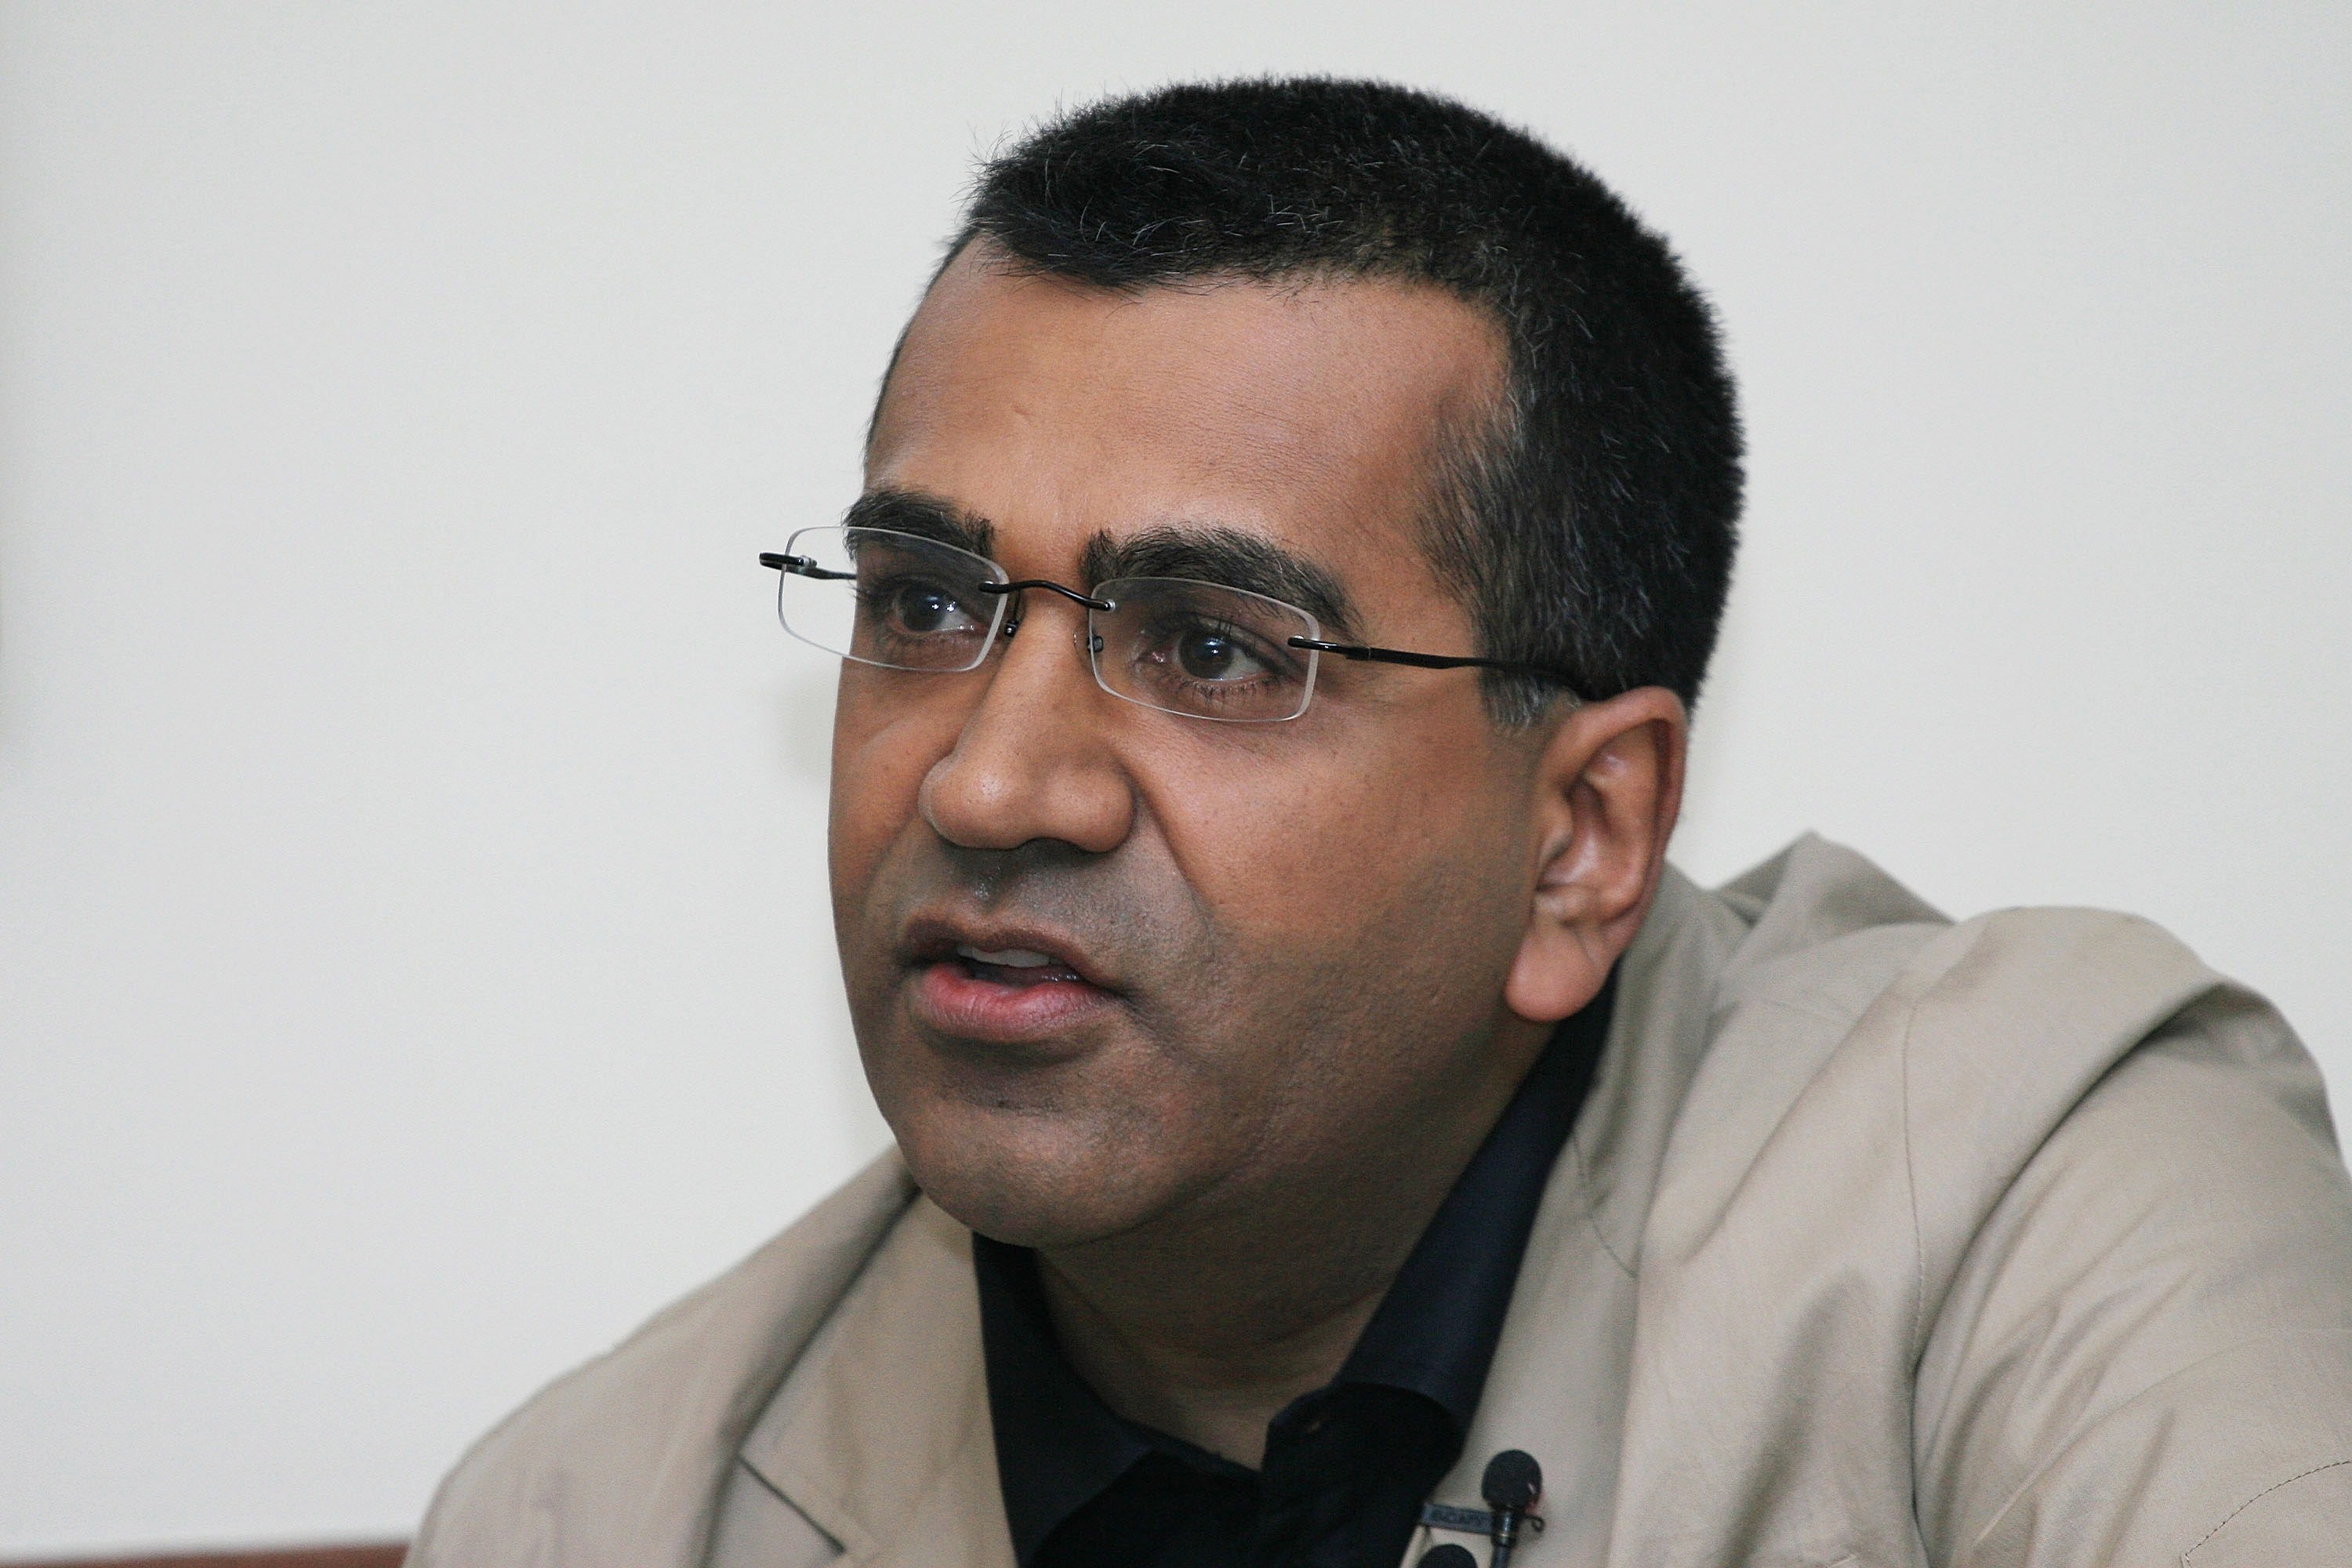 Martin Bashir at a press conference for ‘Girls Gone Wild’ creator Joe Francis at the Beverly Hills Hilton Hotel on 13 March, 2008 in Beverly Hills, California.